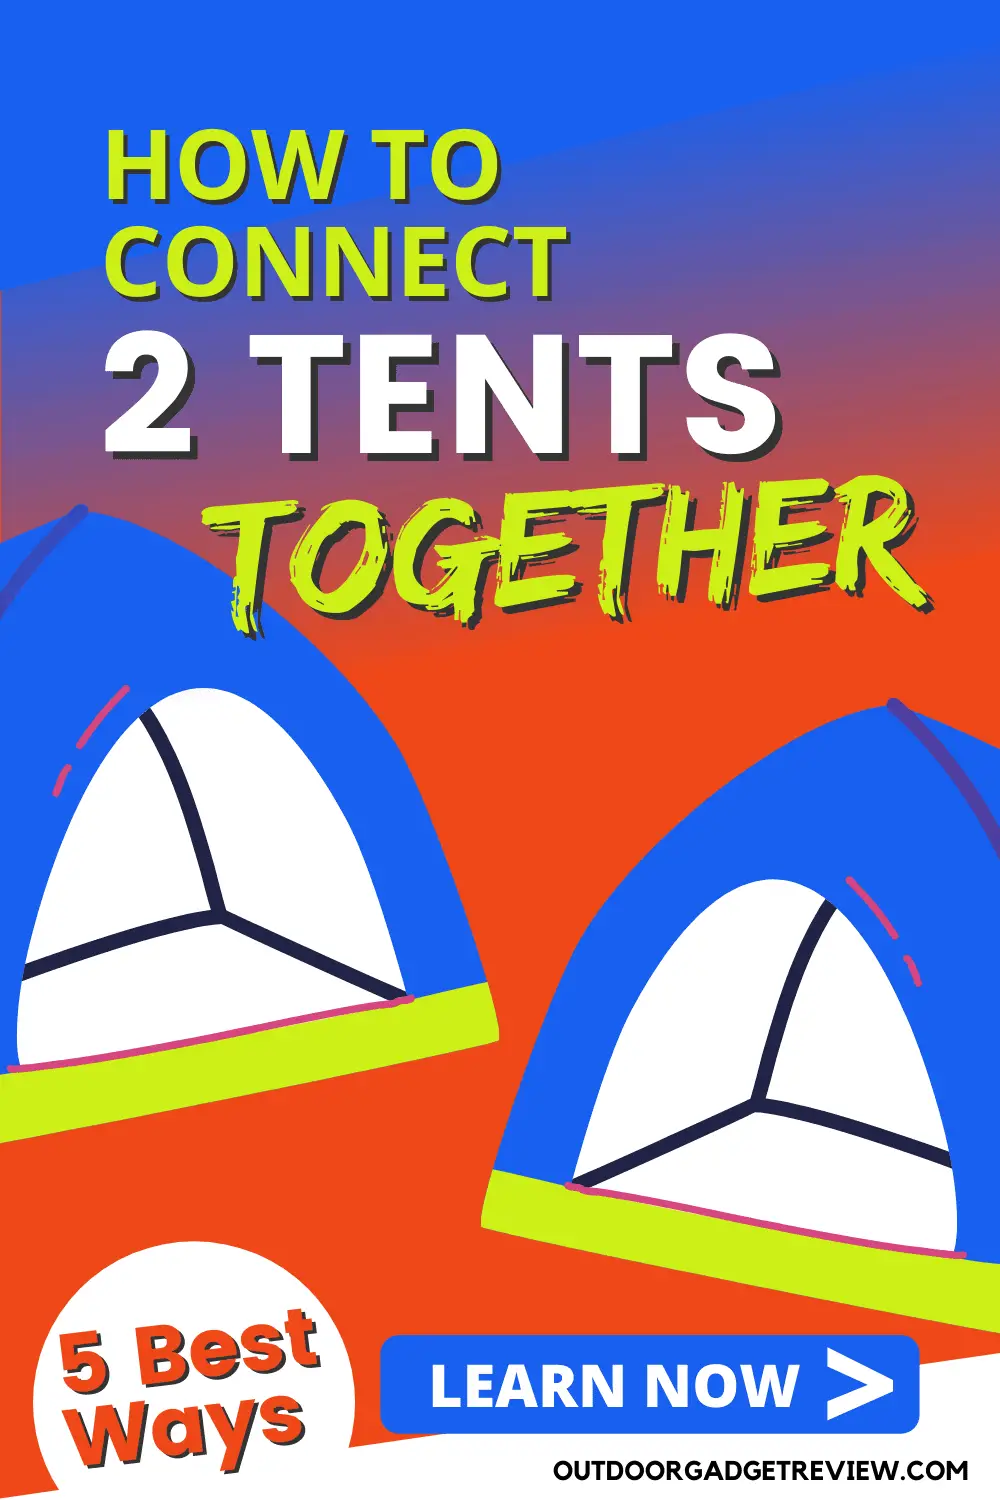 How to Connect two tents together